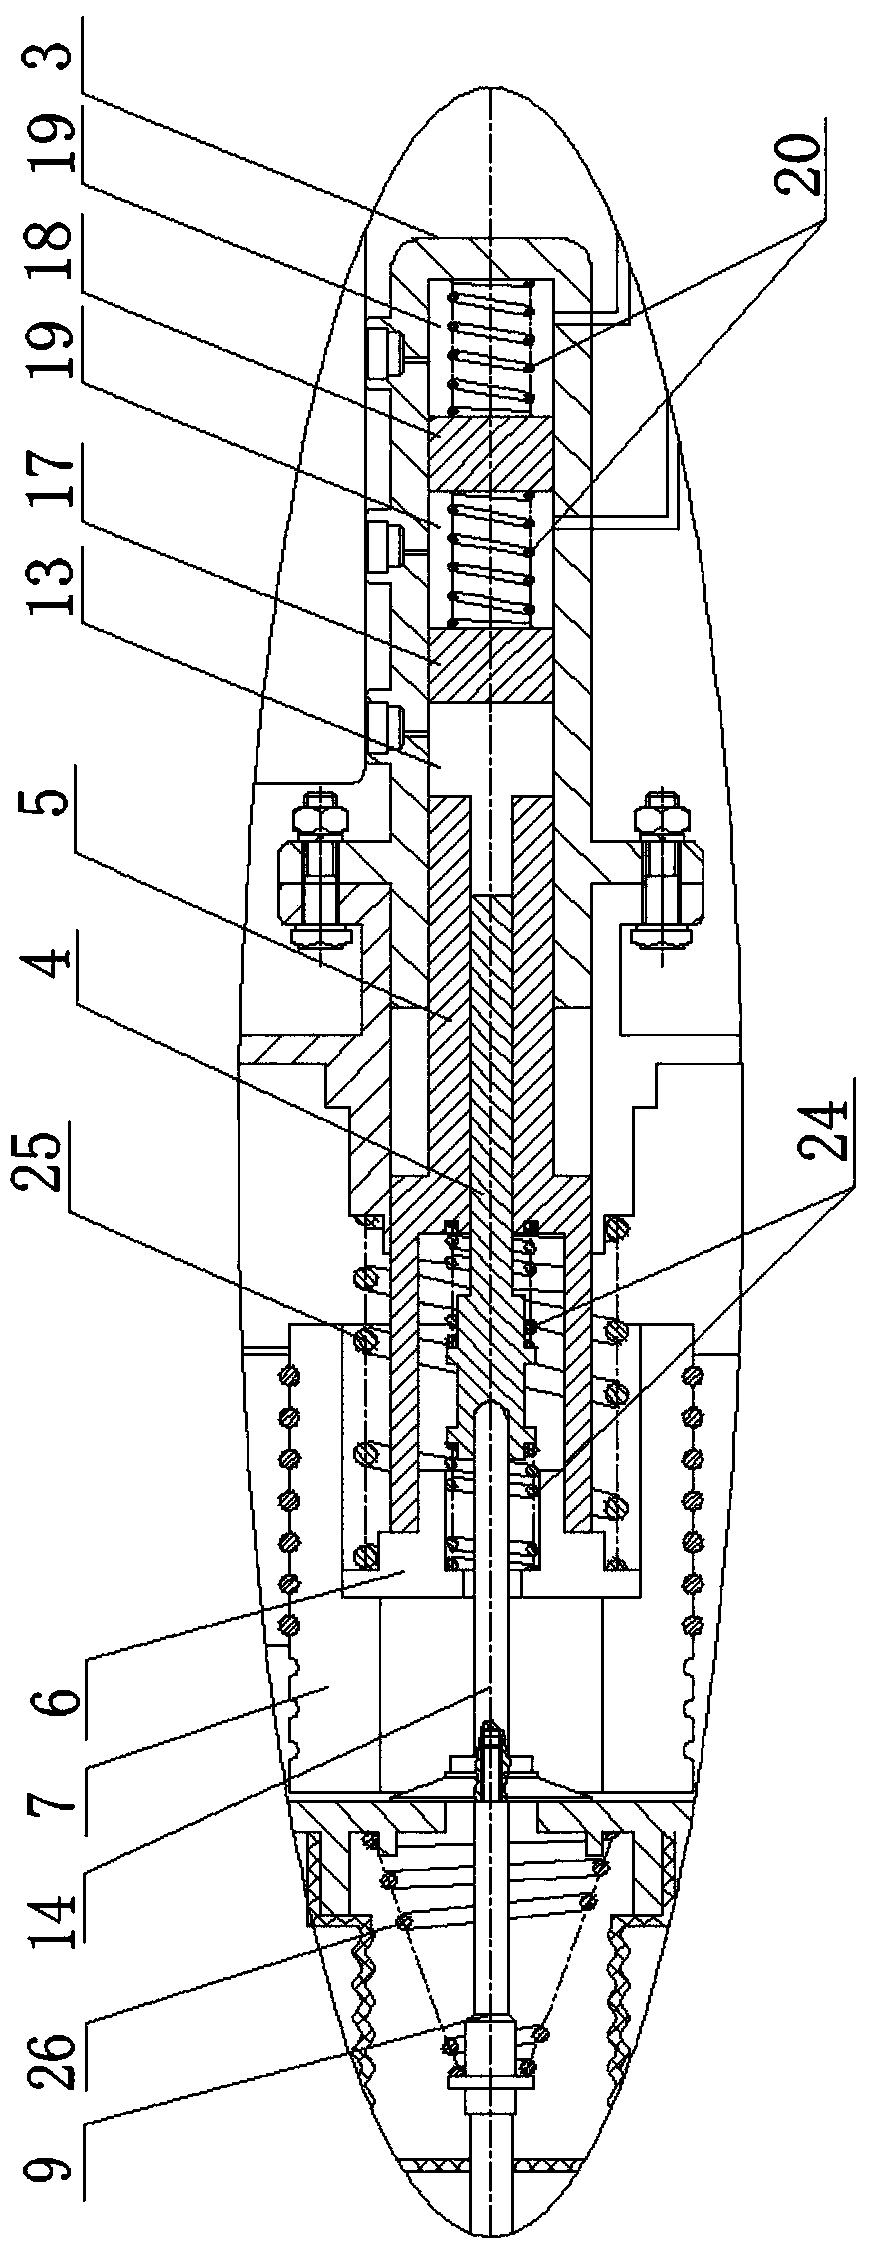 Integrated electric power braking system with novel coupling manner